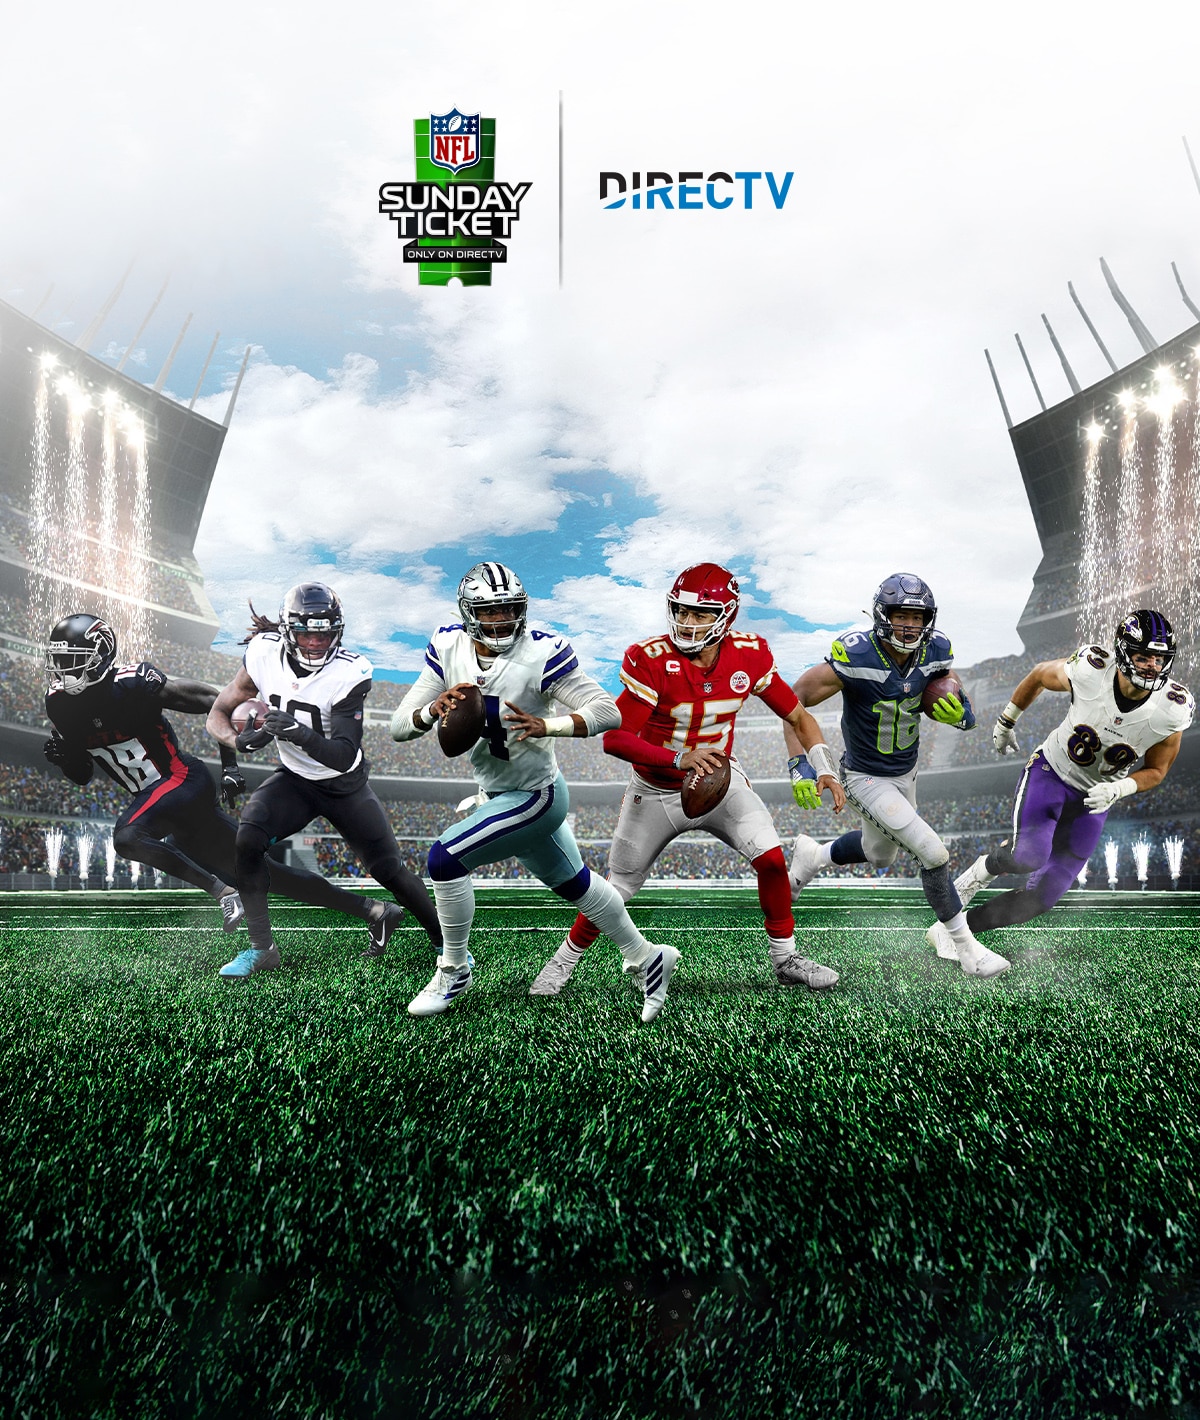 NFL Sunday Ticket is available with DIRECTV Satellite TV packages.